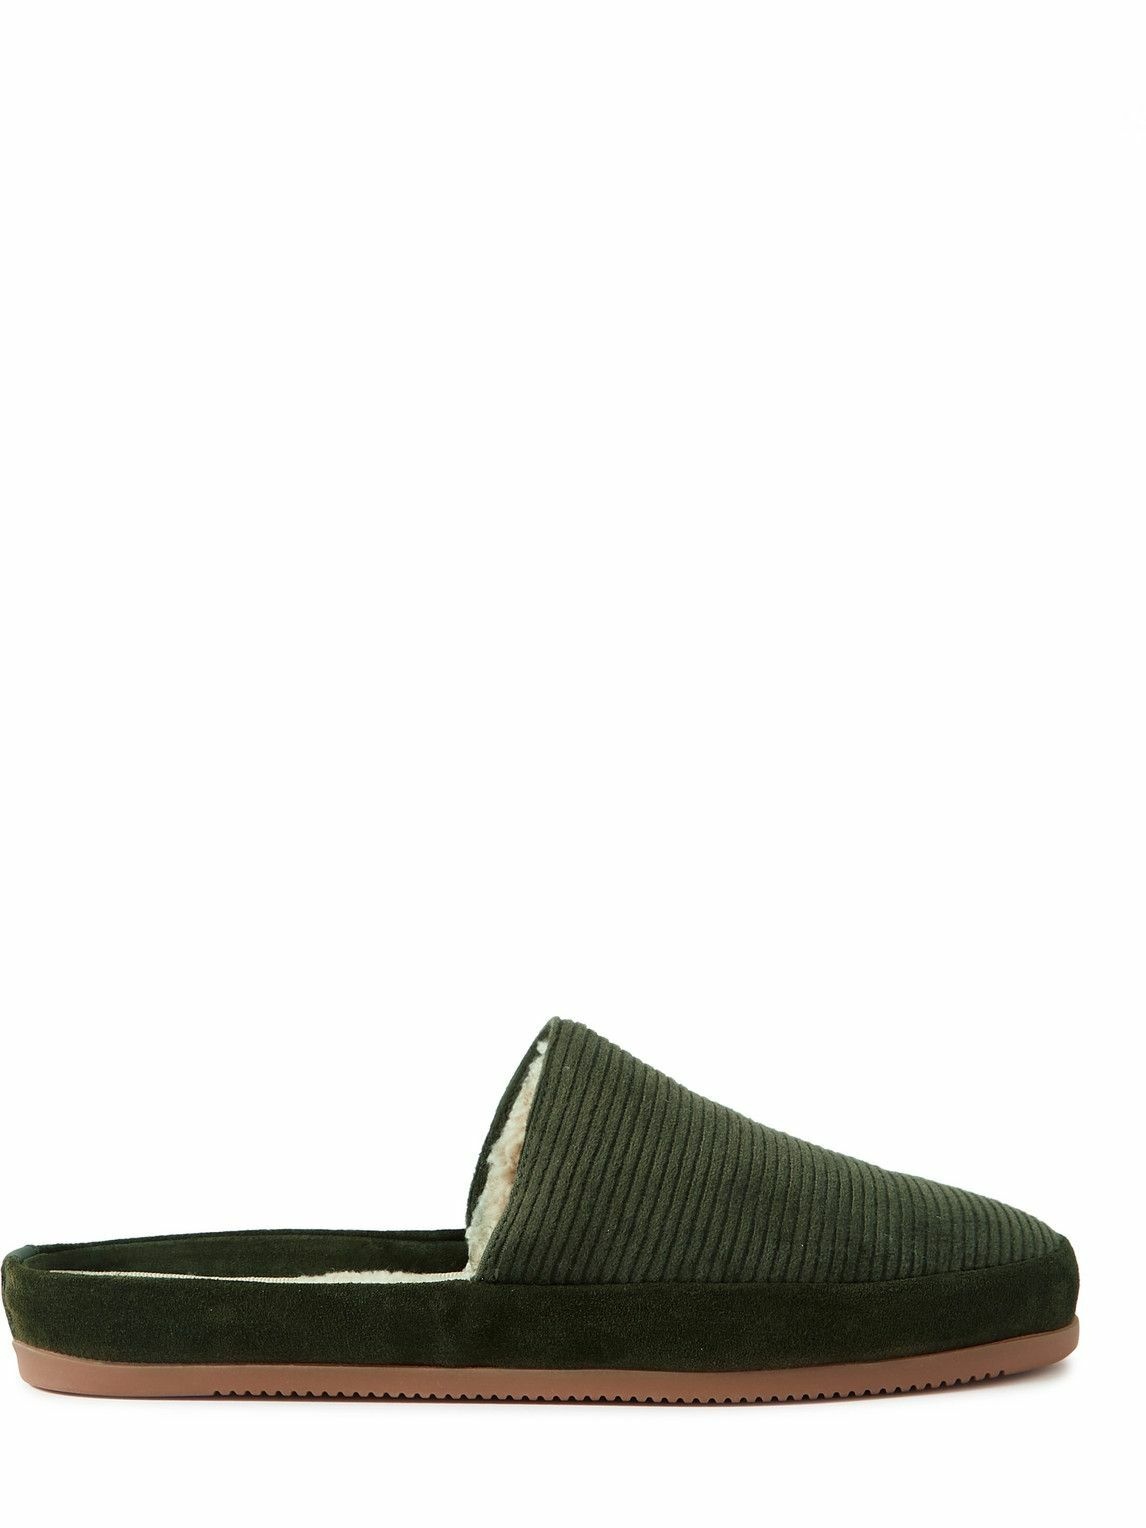 Photo: Mulo - Suede-Trimmed Corduroy Slippers - Green